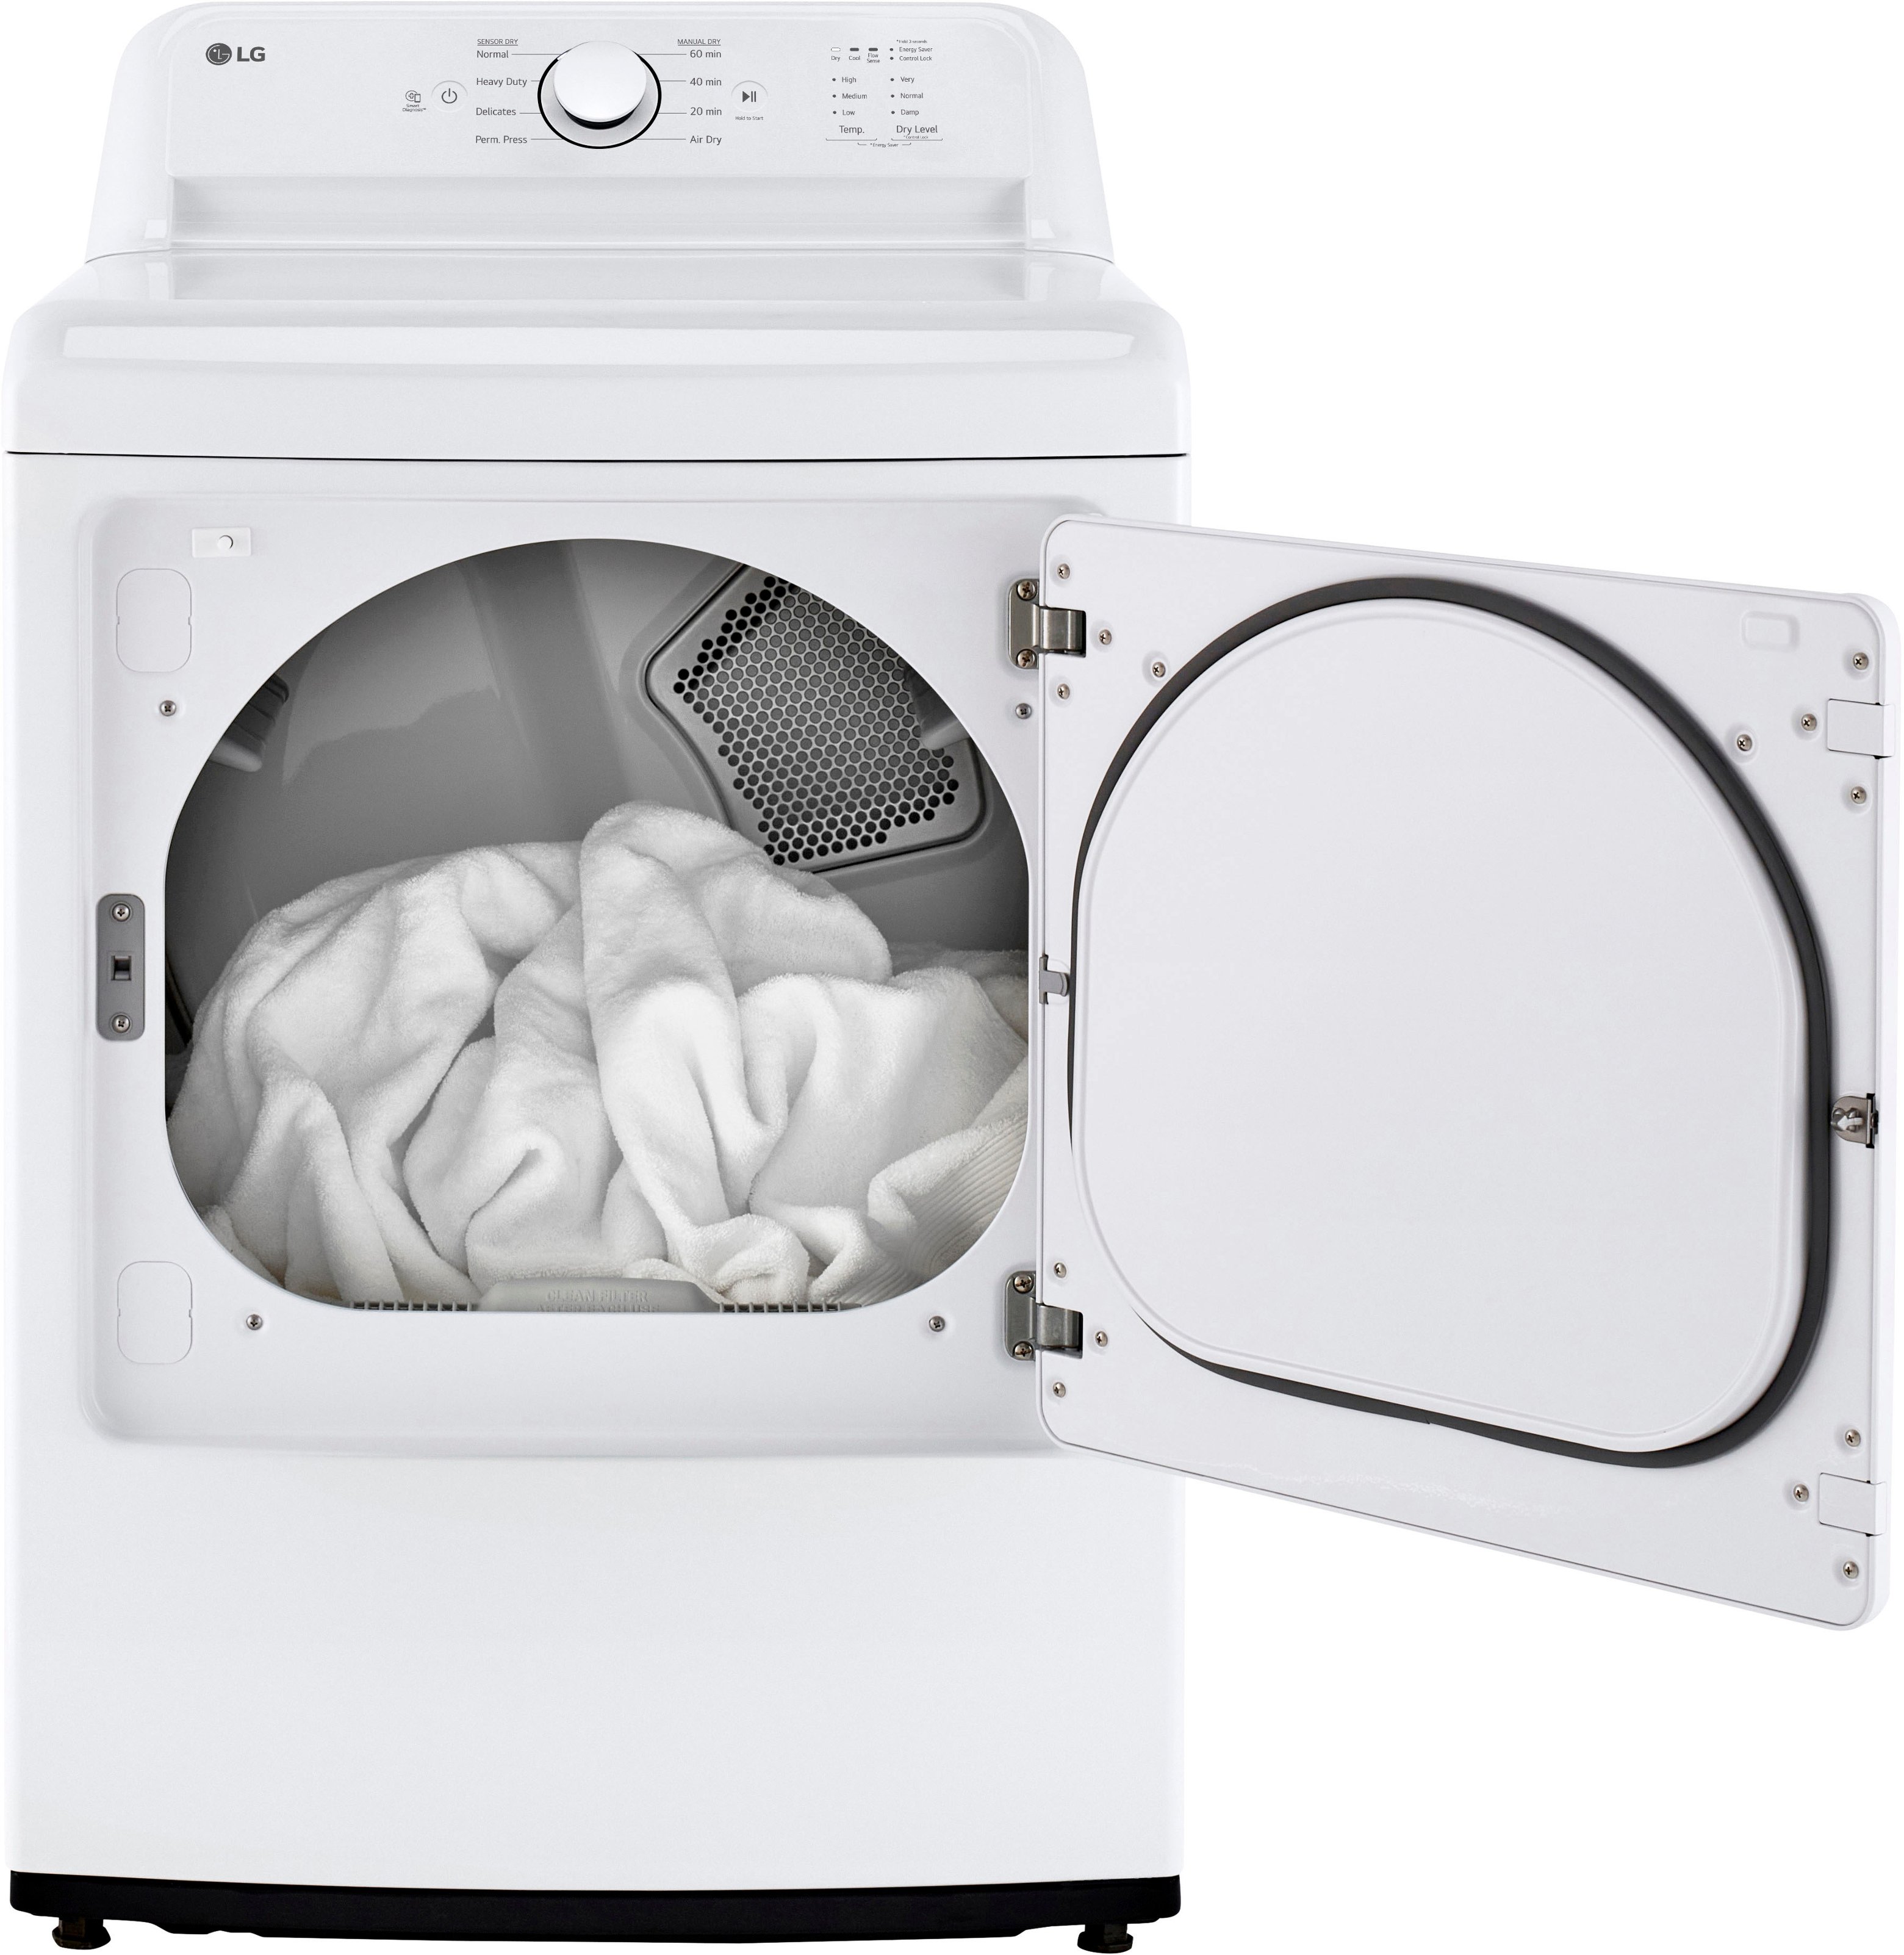 Lg dryer - Checked Appliances